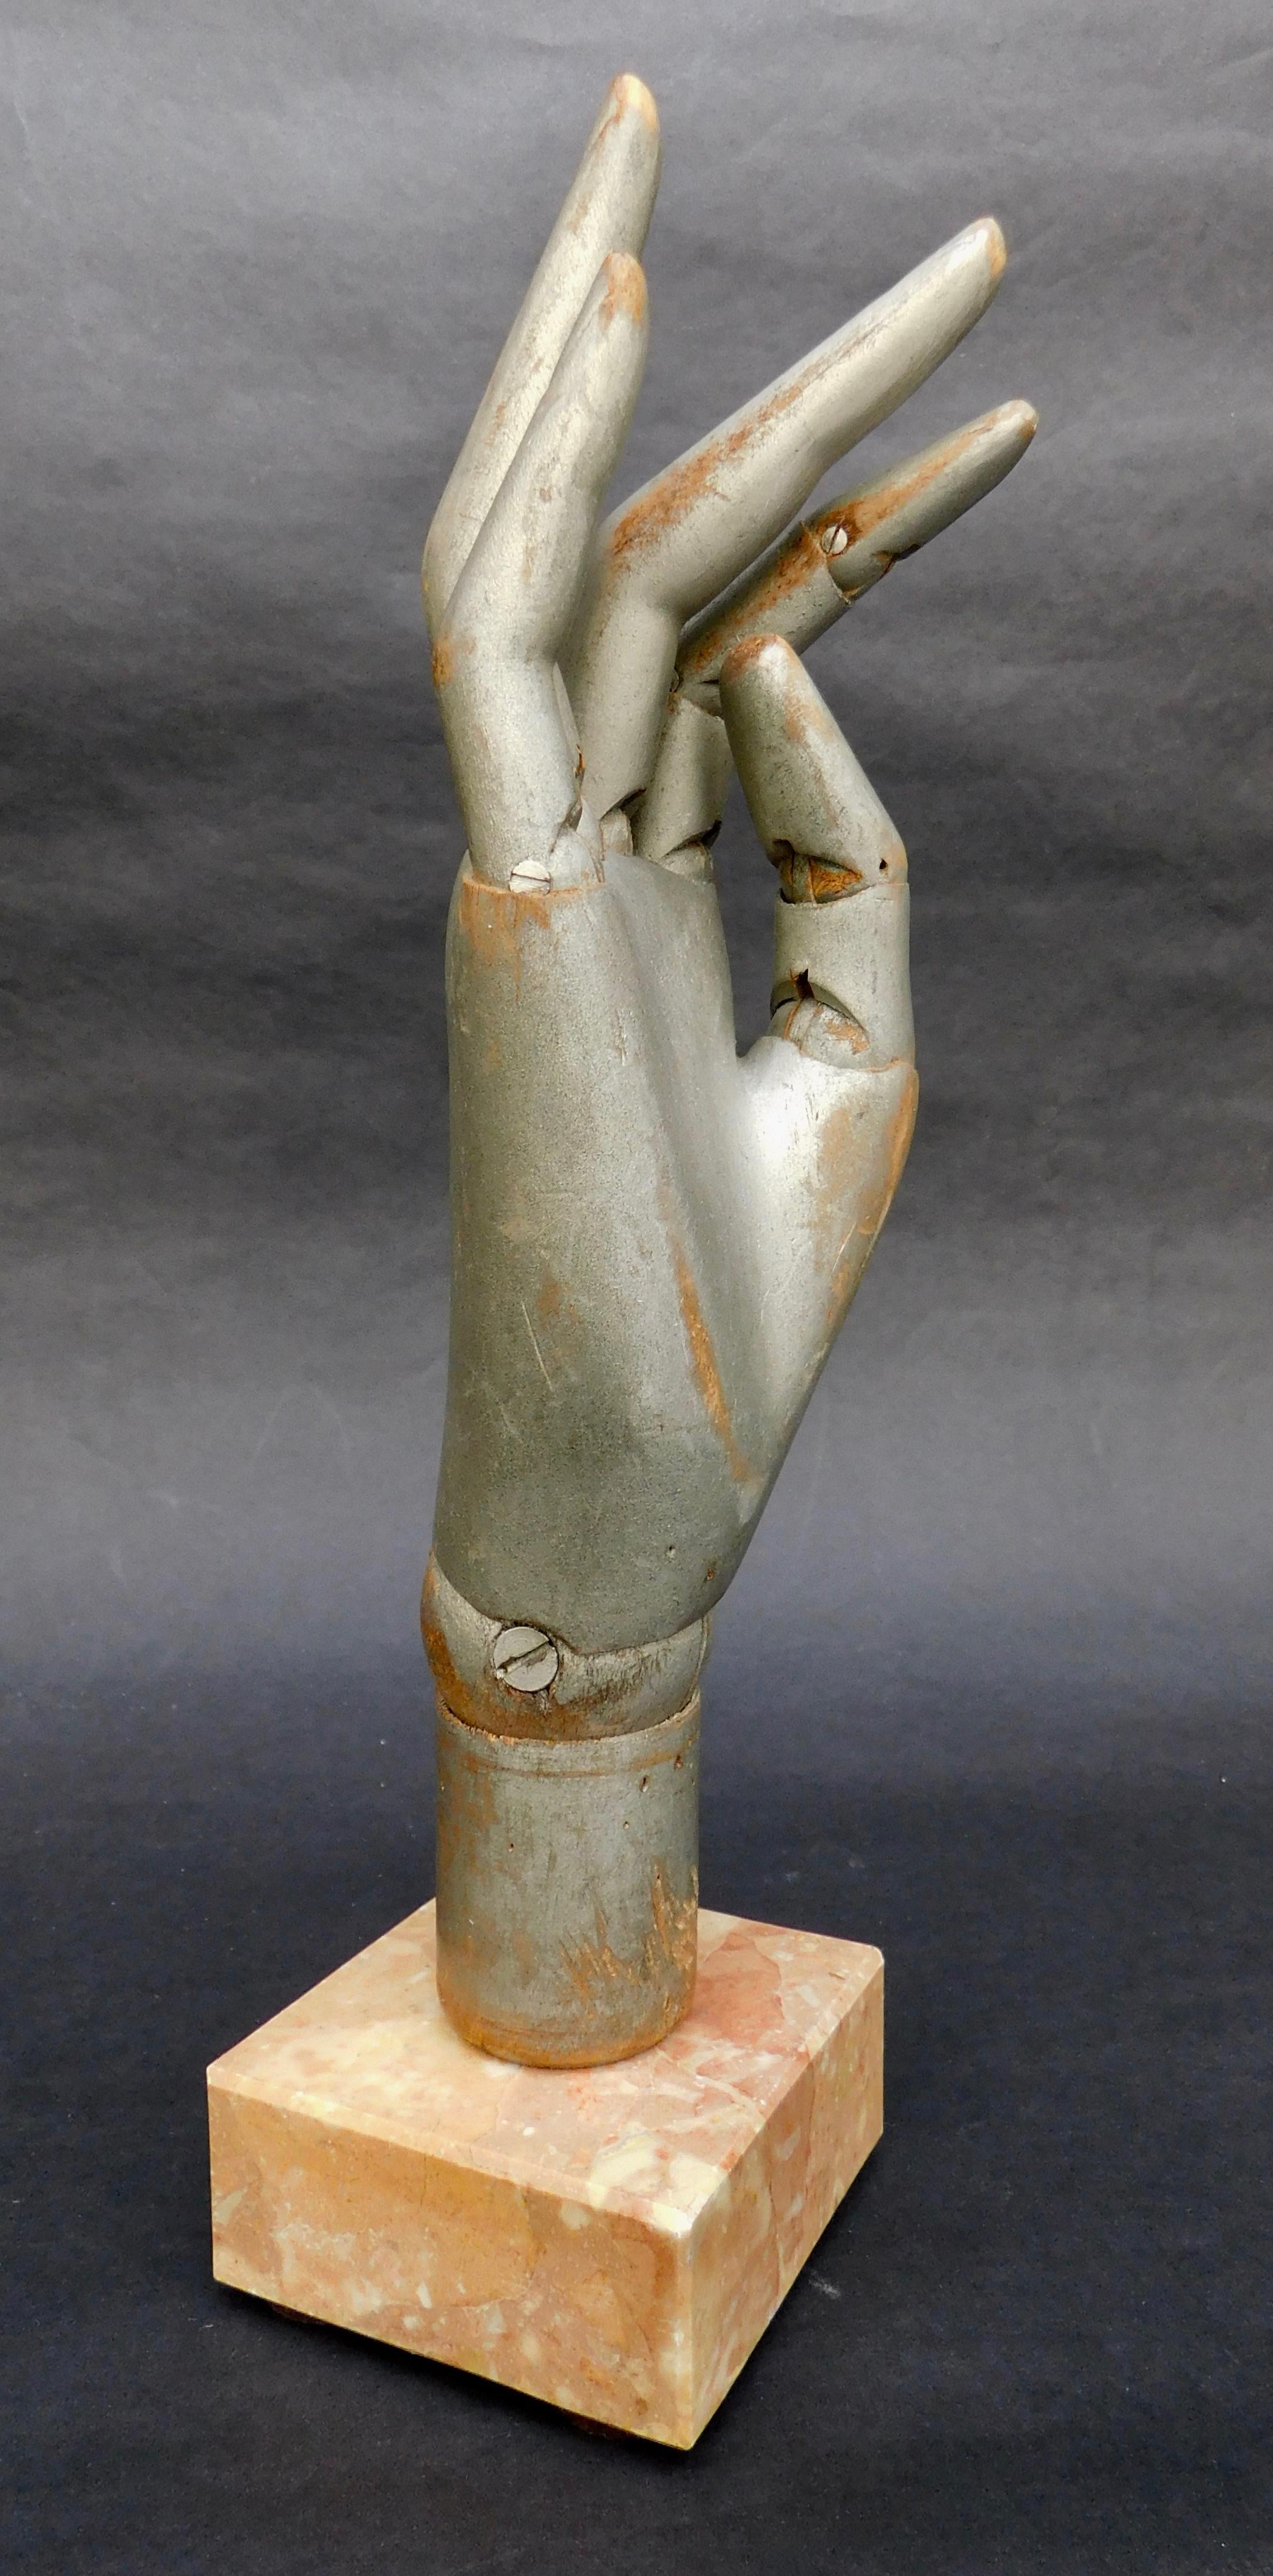 A lifesize mannequin hand with fully articulated fingers and wrist. Moveable to create endless positions. Mounted on an Italian marble stand with a wooded peg so that the hand can be easily removed if so desired.